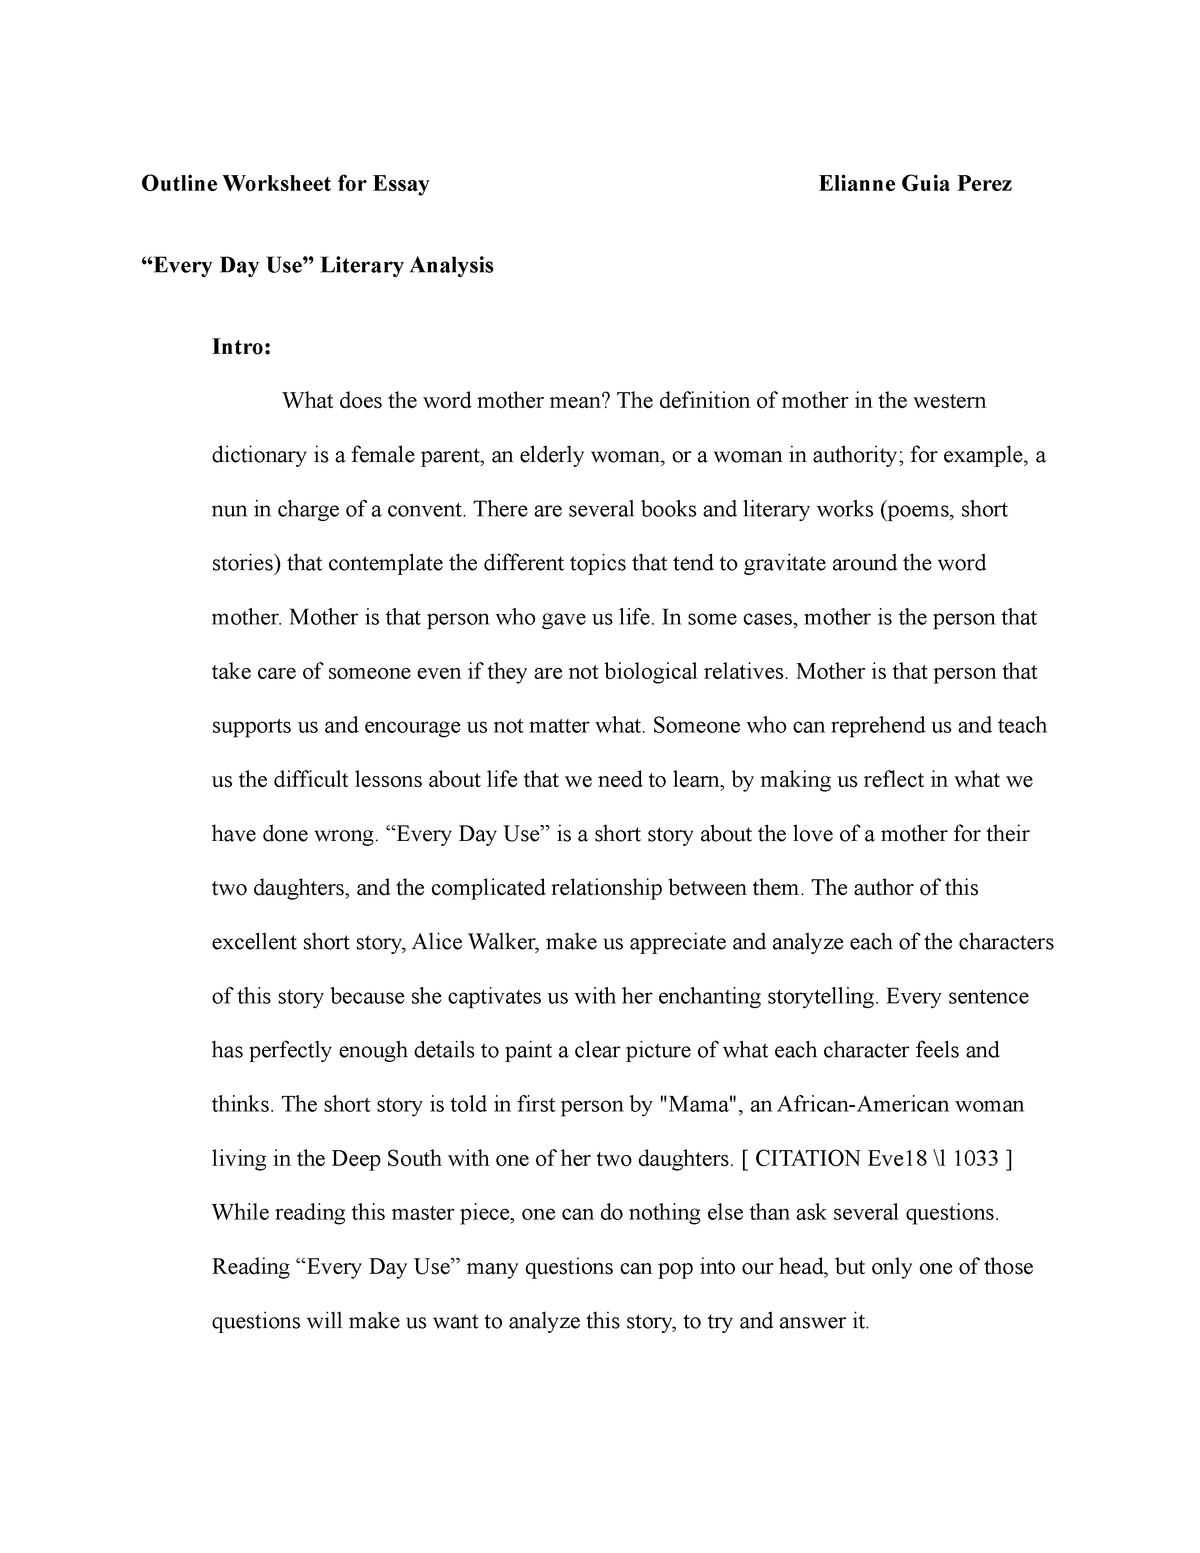 Literary Analysis Outline Every day use 13 - Outline Worksheet for